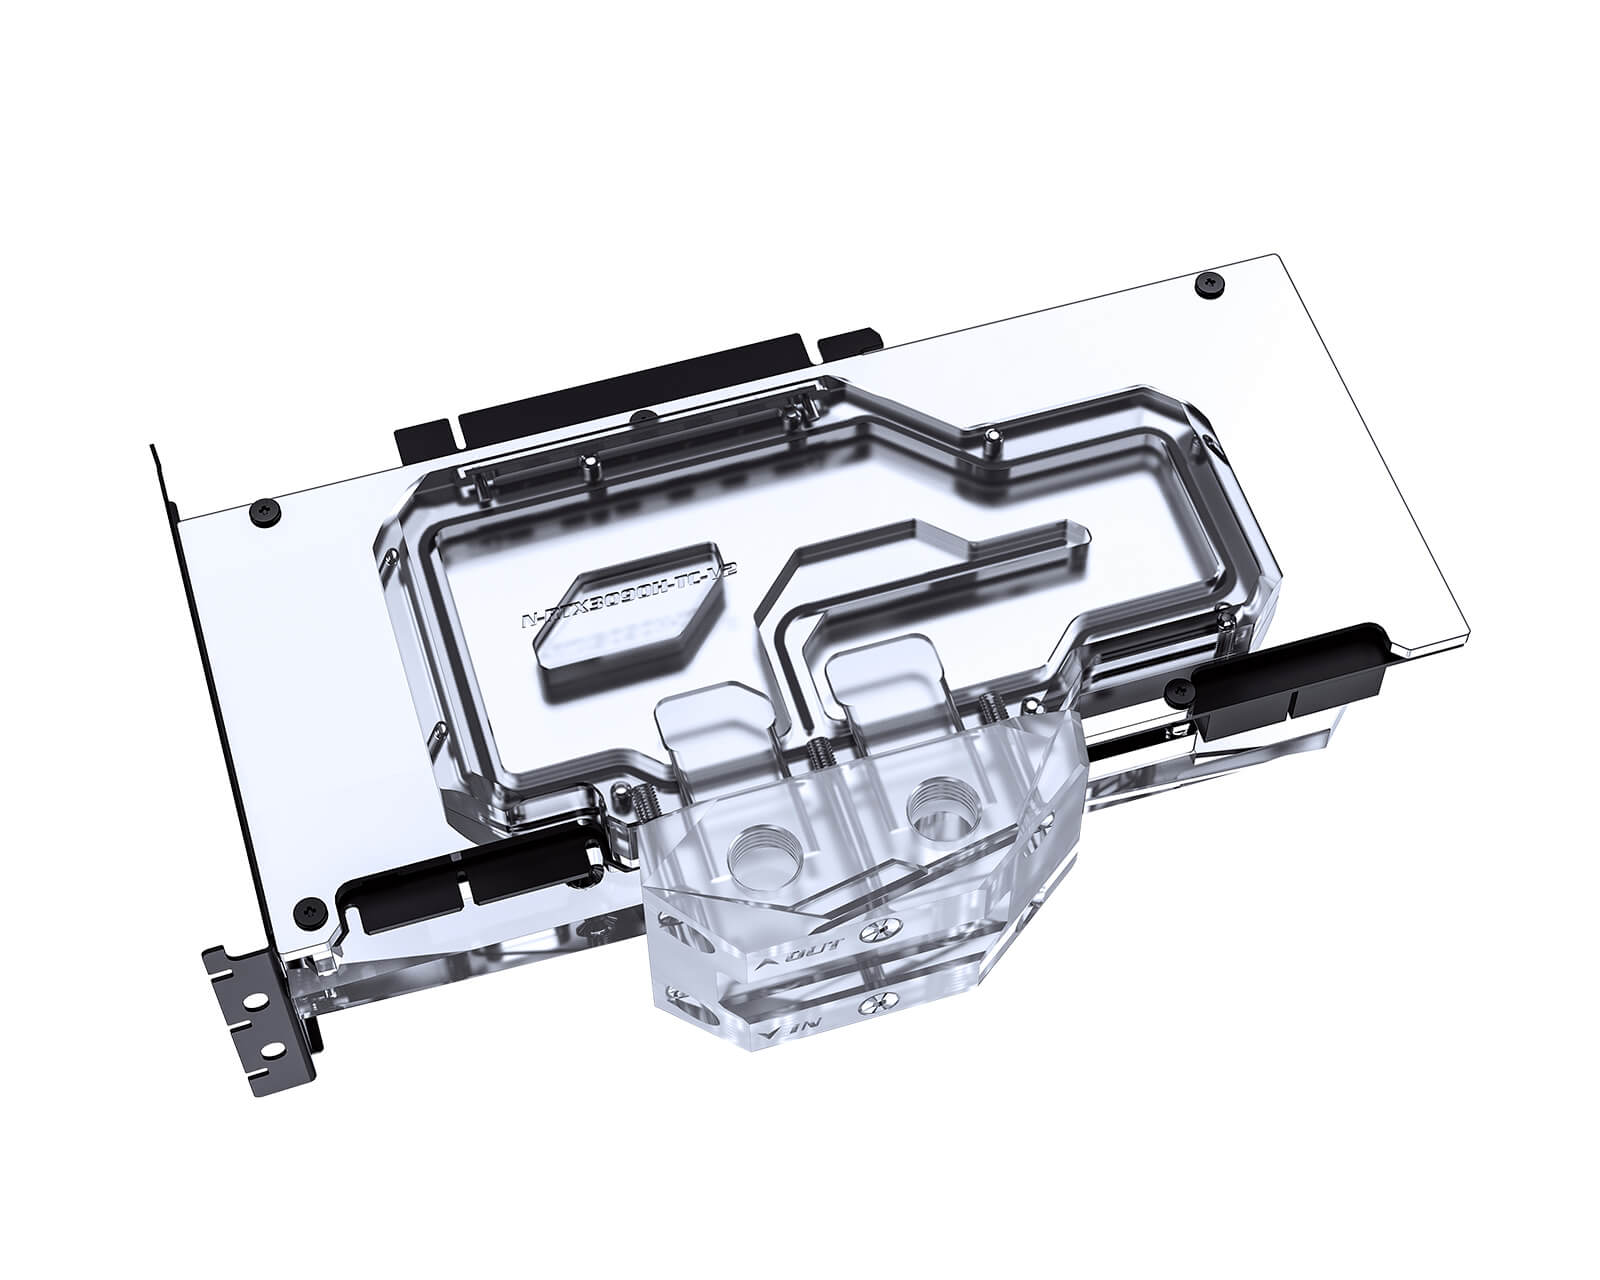 Bykski Full Coverage GPU Water Block w/ Integrated Active Backplate for Zotac RTX 3090 GAMING OC (N-ST3090XG-TC) - PrimoChill - KEEPING IT COOL